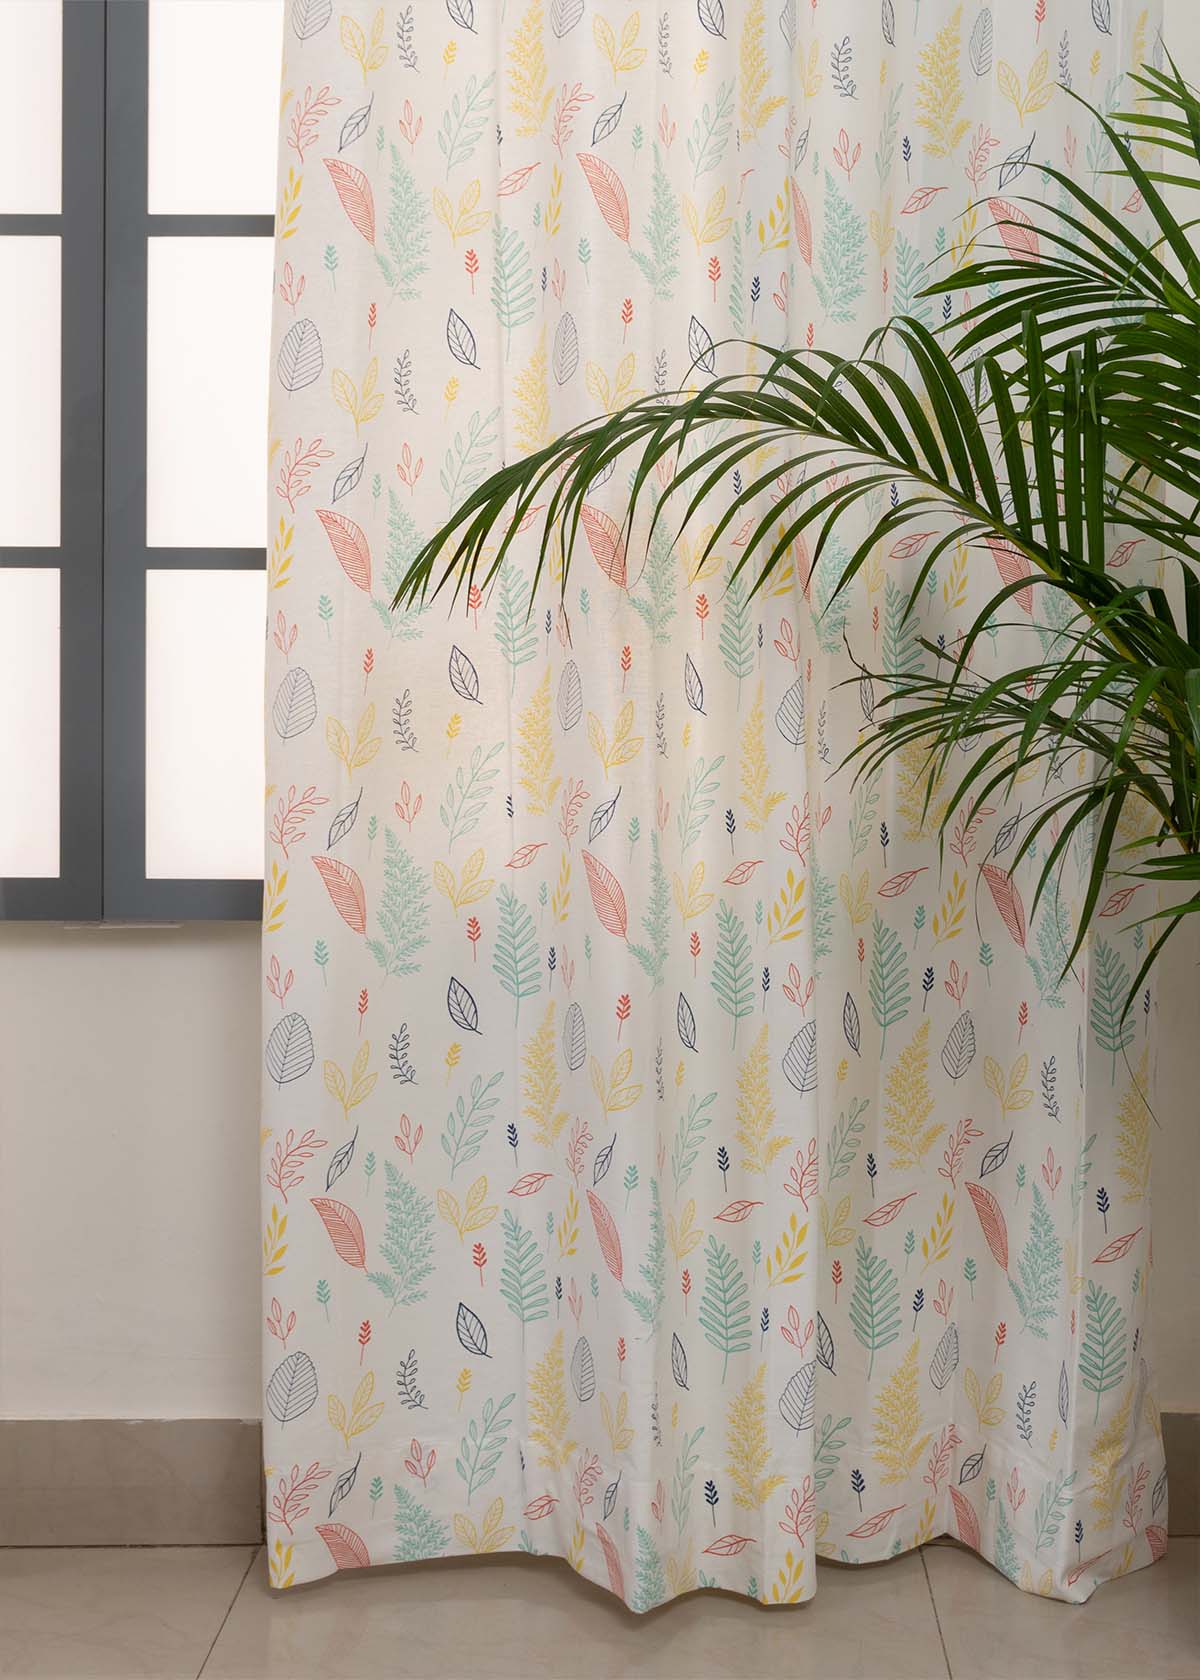 Rustling Leaves Printed Cotton Curtain - Multicolor